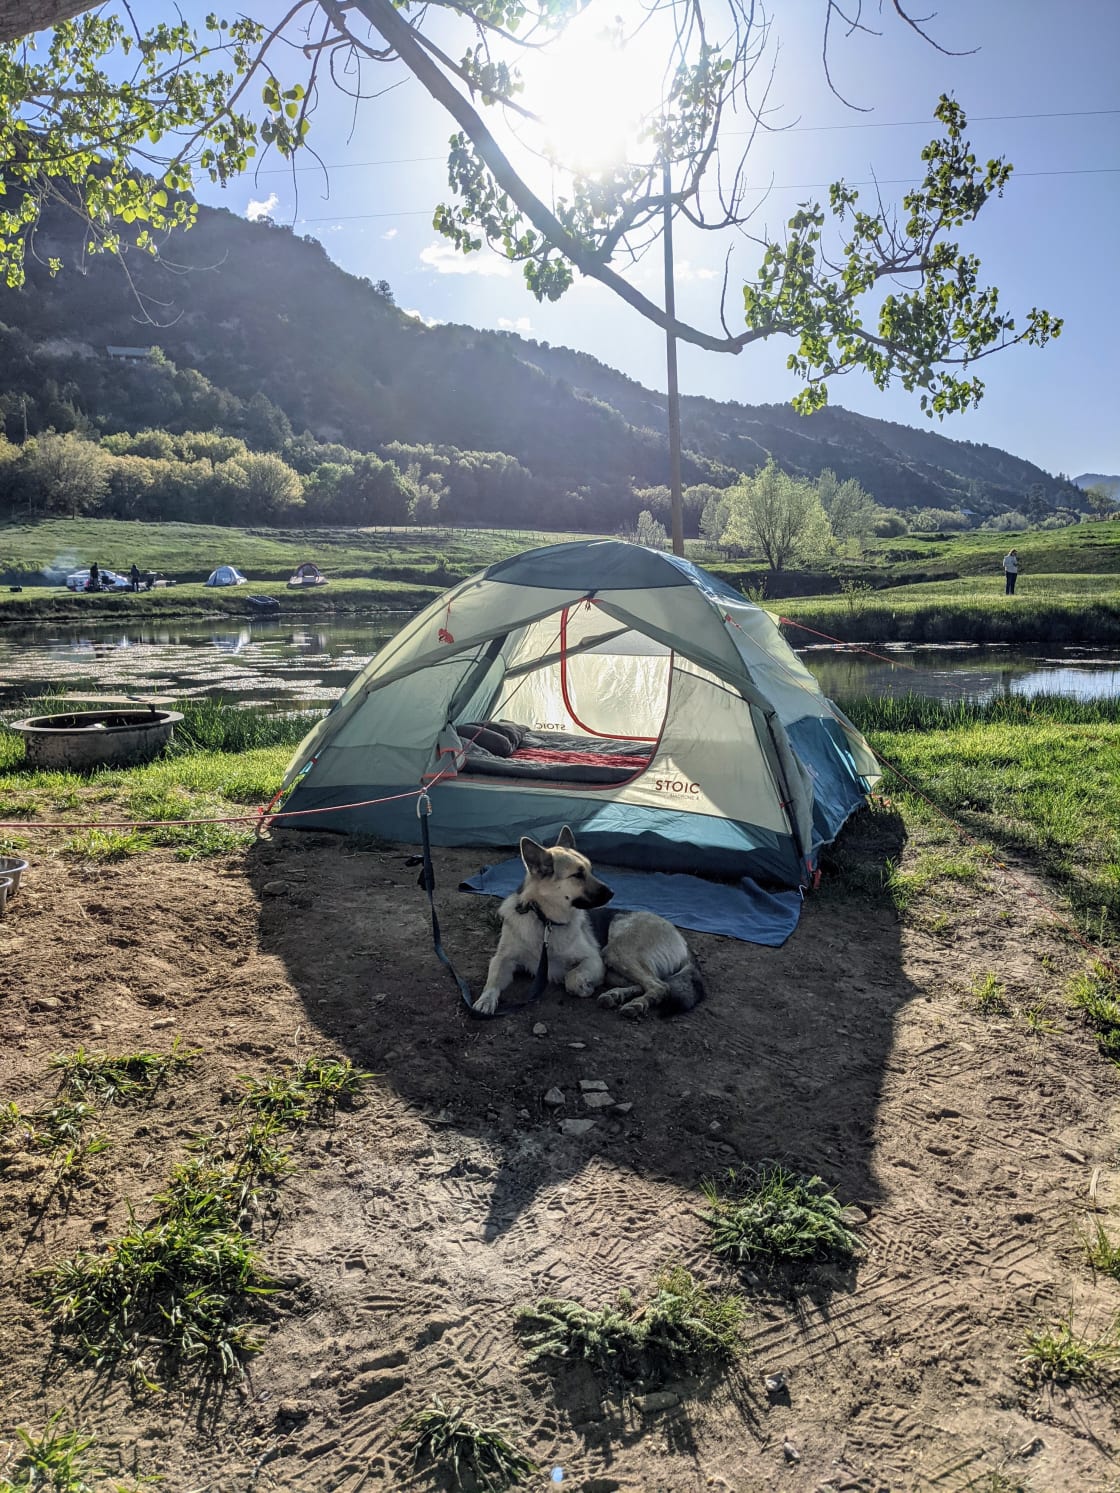 Happy to find a dog friendly campsite! Freya loved watching the ducks.